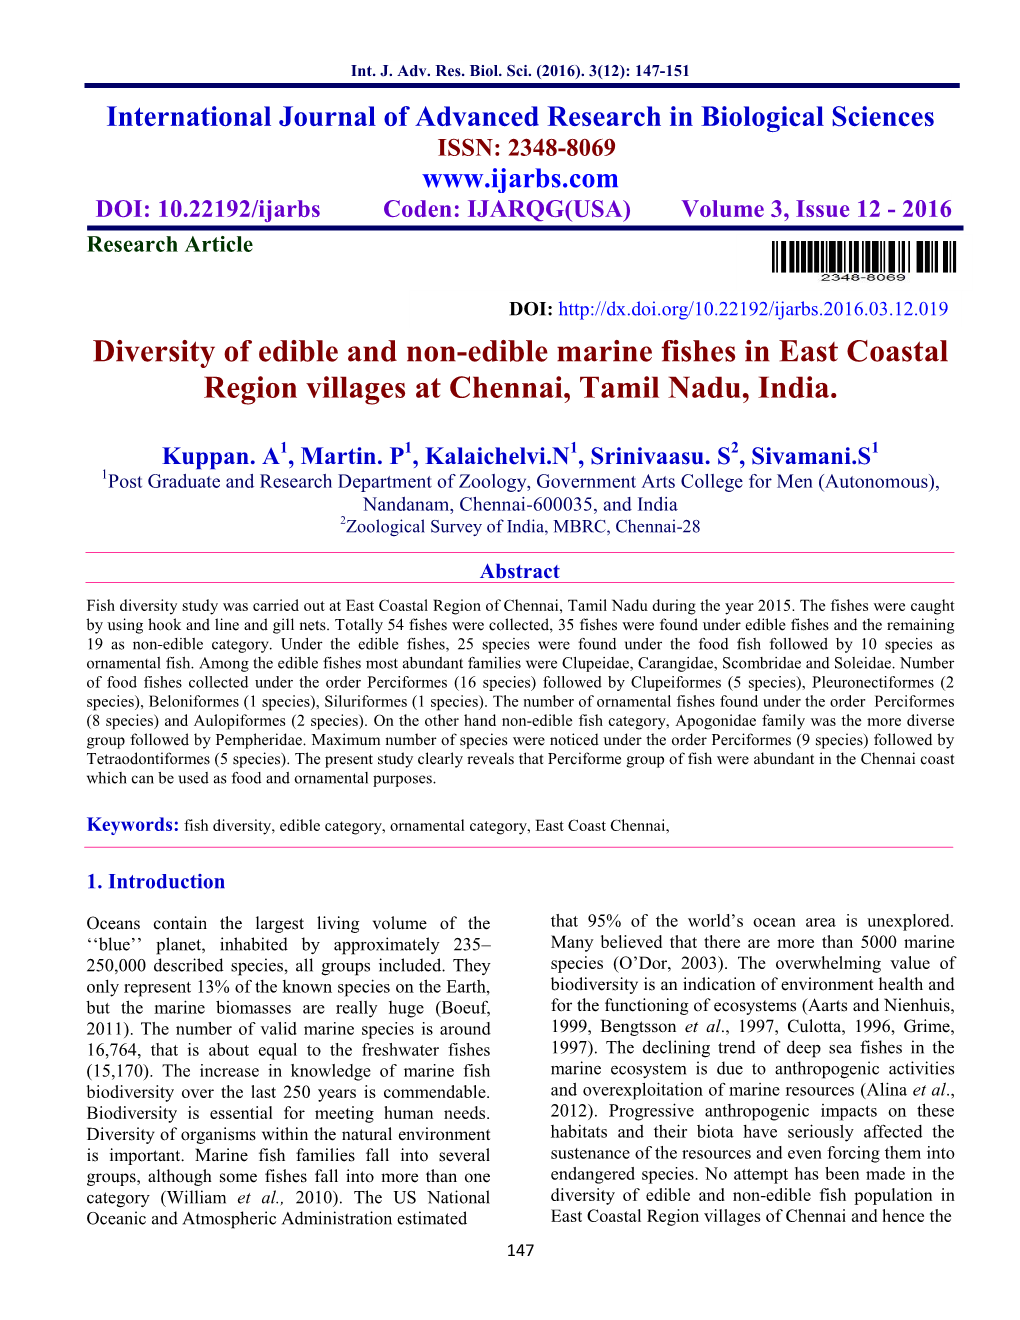 Diversity of Edible and Non-Edible Marine Fishes in East Coastal Region Villages at Chennai, Tamil Nadu, India